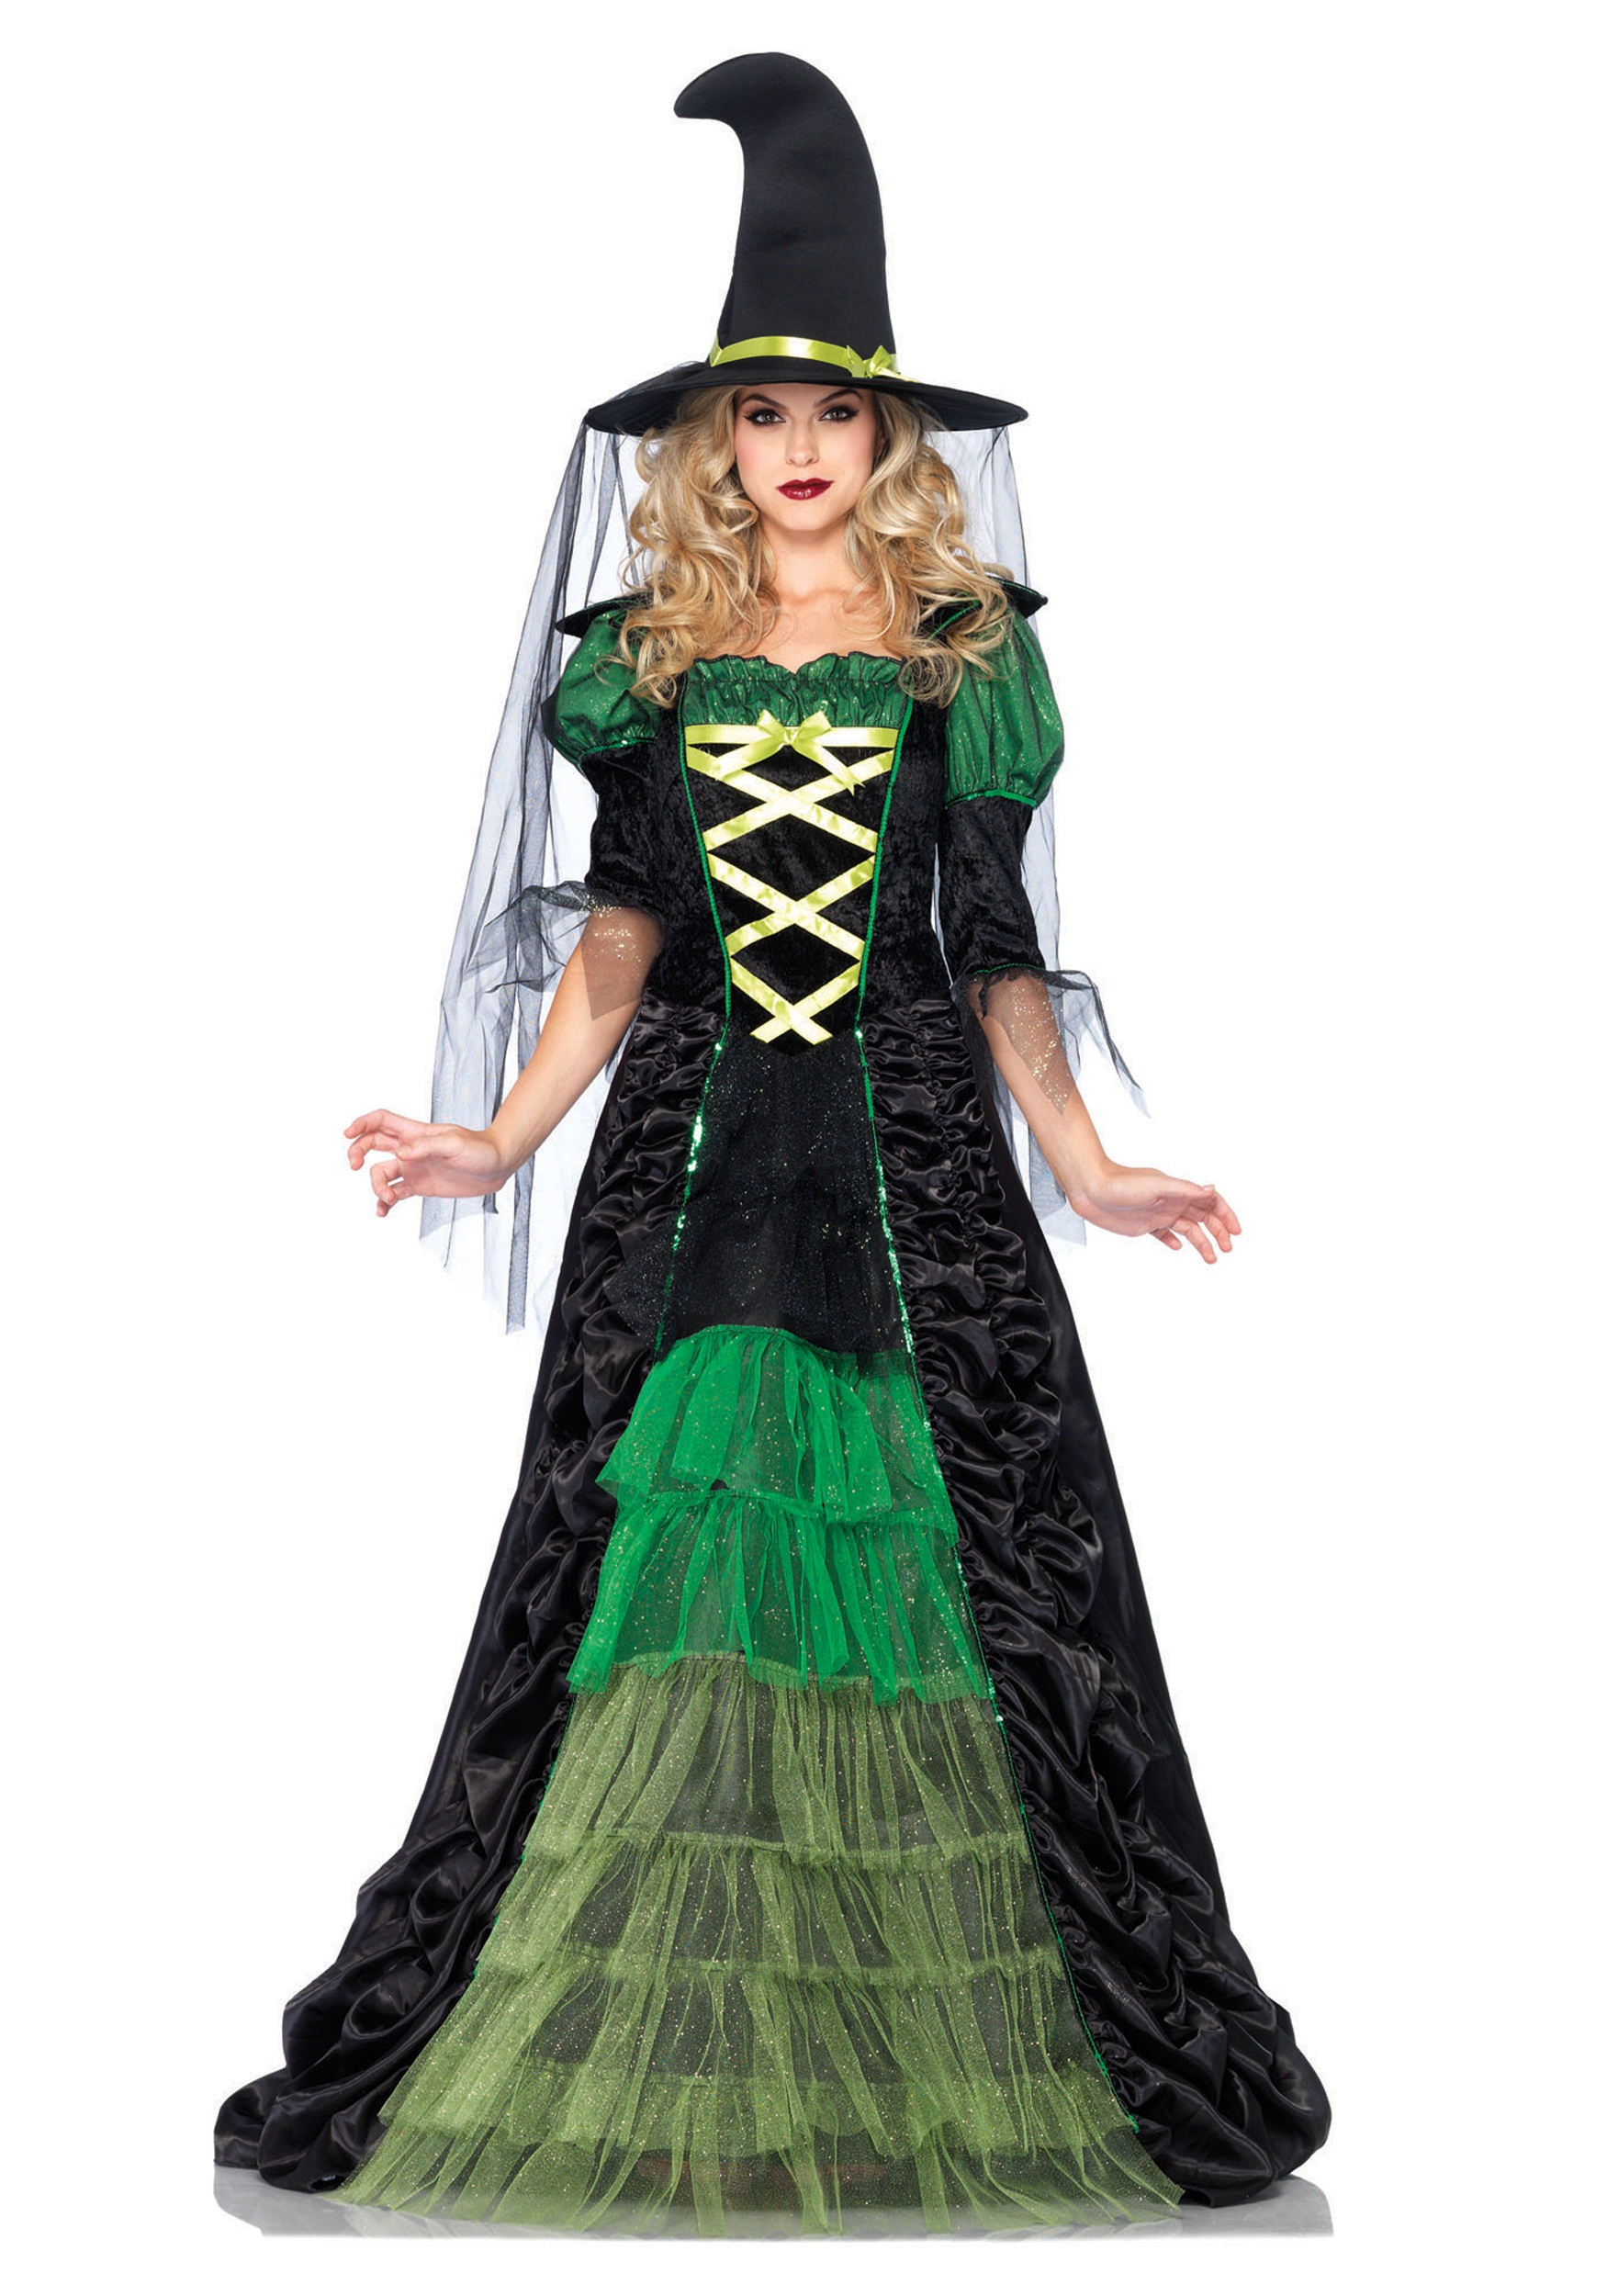 Image of Storybook Witch Adult Costume ID LE85240-1X/2X